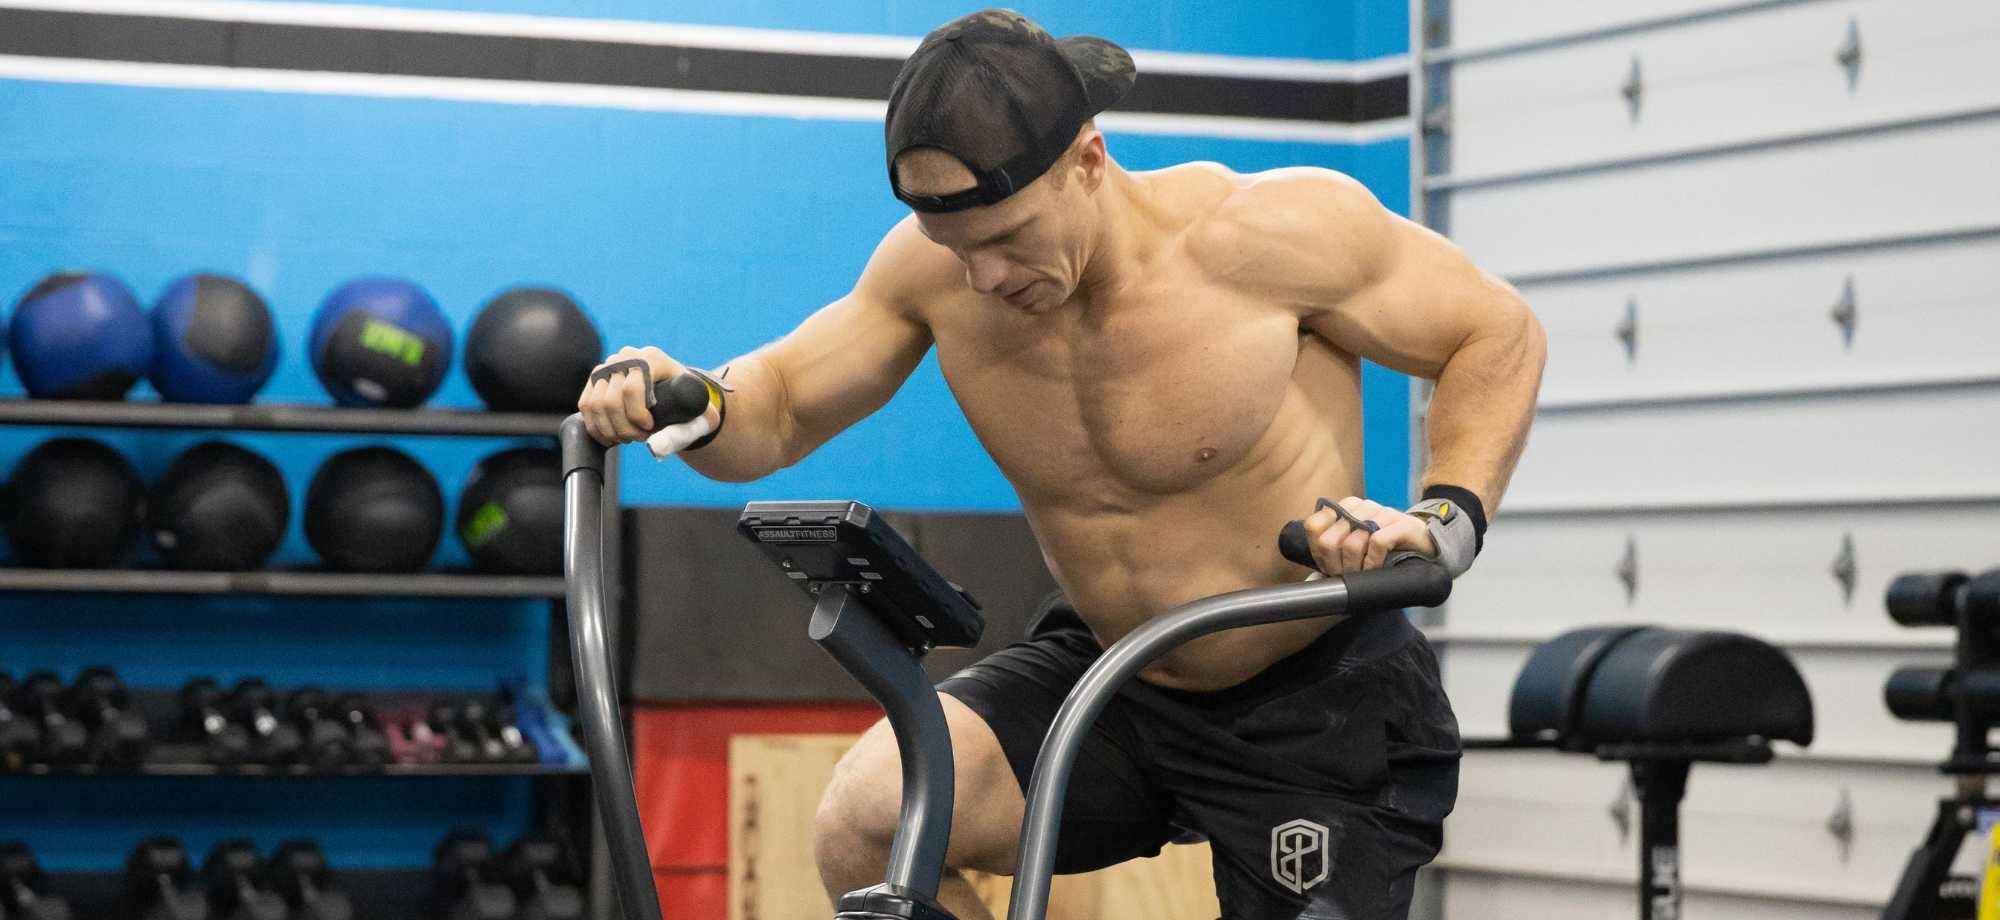 CrossFit Athlete Scott Panchik on Mental Fortitude & Training for the Unpredictable